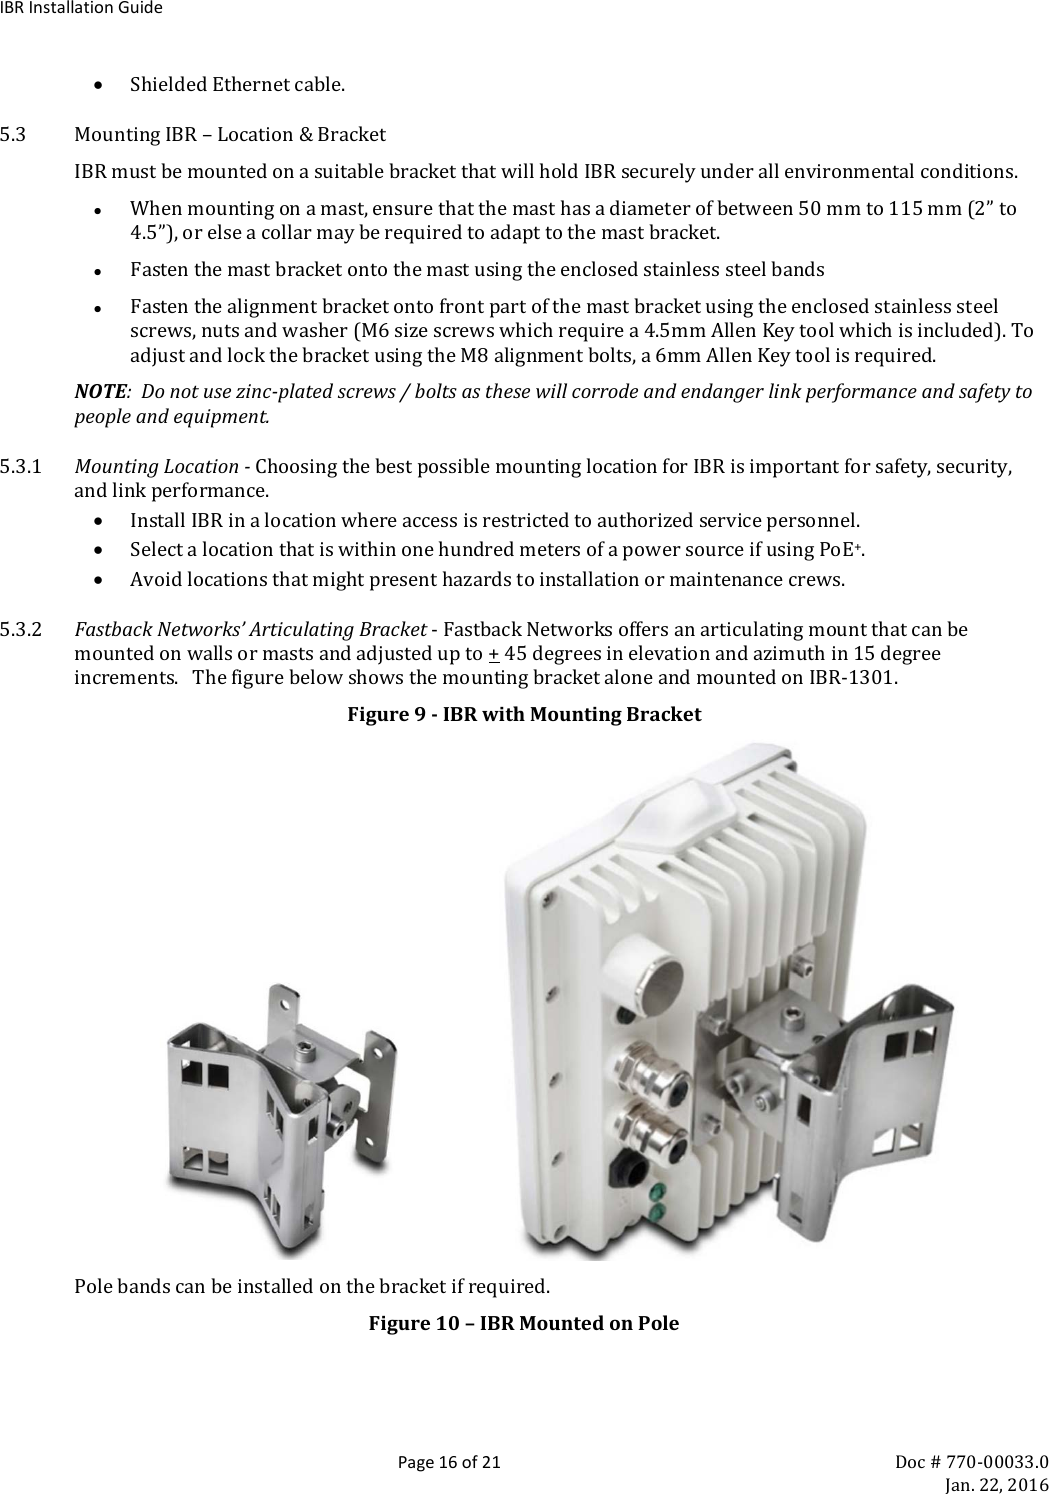 IBR Installation Guide  Page 16 of 21 Doc # 770-00033.0     Jan. 22, 2016 • Shielded Ethernet cable. 5.3 Mounting IBR – Location &amp; Bracket IBR must be mounted on a suitable bracket that will hold IBR securely under all environmental conditions. • When mounting on a mast, ensure that the mast has a diameter of between 50 mm to 115 mm (2” to 4.5”), or else a collar may be required to adapt to the mast bracket. • Fasten the mast bracket onto the mast using the enclosed stainless steel bands • Fasten the alignment bracket onto front part of the mast bracket using the enclosed stainless steel screws, nuts and washer (M6 size screws which require a 4.5mm Allen Key tool which is included). To adjust and lock the bracket using the M8 alignment bolts, a 6mm Allen Key tool is required. NOTE:  Do not use zinc-plated screws / bolts as these will corrode and endanger link performance and safety to people and equipment.  5.3.1 Mounting Location - Choosing the best possible mounting location for IBR is important for safety, security, and link performance. • Install IBR in a location where access is restricted to authorized service personnel. • Select a location that is within one hundred meters of a power source if using PoE+. • Avoid locations that might present hazards to installation or maintenance crews. 5.3.2 Fastback Networks’ Articulating Bracket - Fastback Networks offers an articulating mount that can be mounted on walls or masts and adjusted up to + 45 degrees in elevation and azimuth in 15 degree increments.   The figure below shows the mounting bracket alone and mounted on IBR-1301. Figure 9 - IBR with Mounting Bracket                     Pole bands can be installed on the bracket if required. Figure 10 – IBR Mounted on Pole 